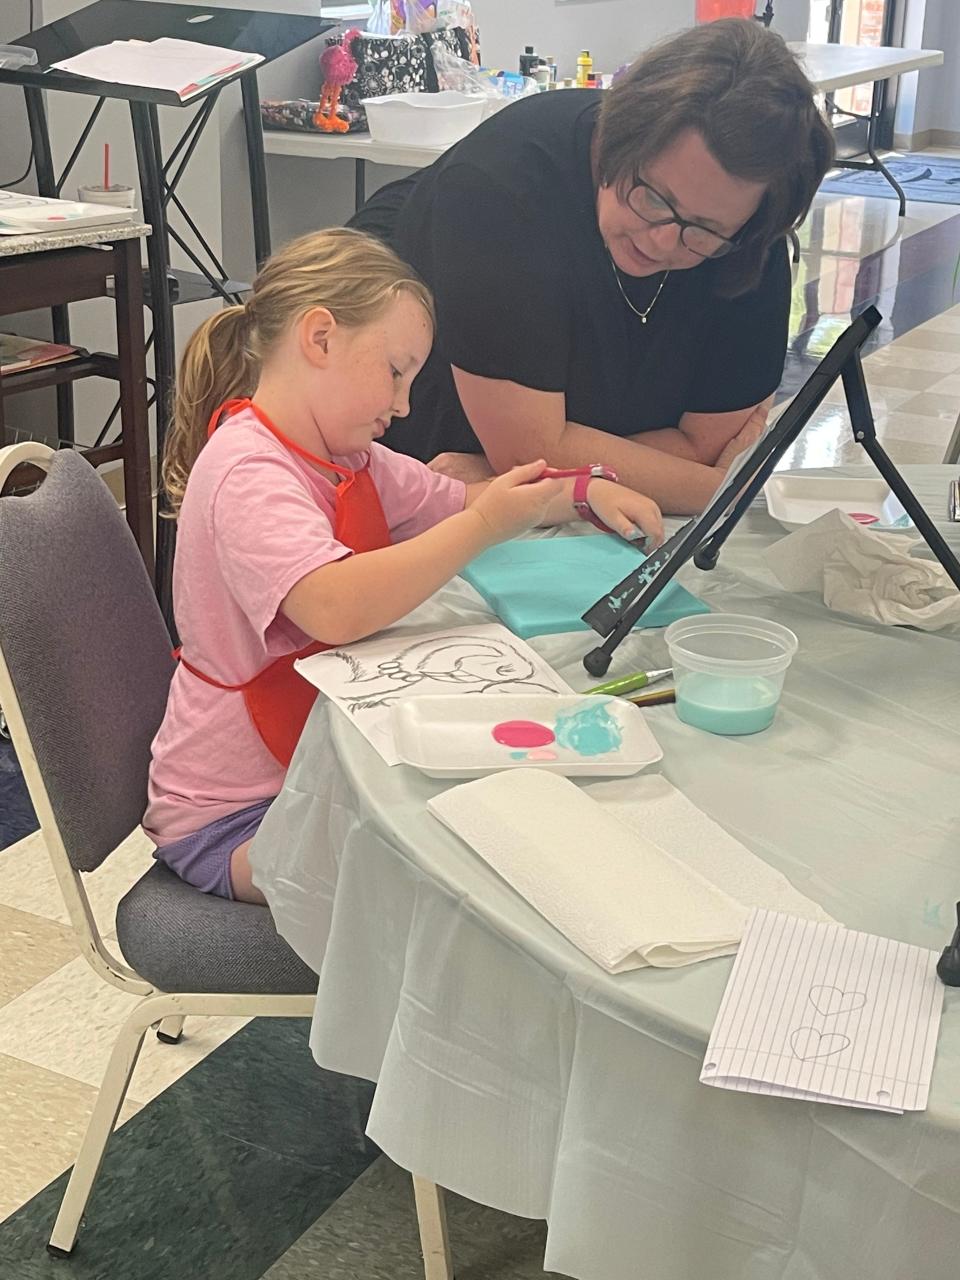 Charisma Stinnett works with a student in her summer art class.